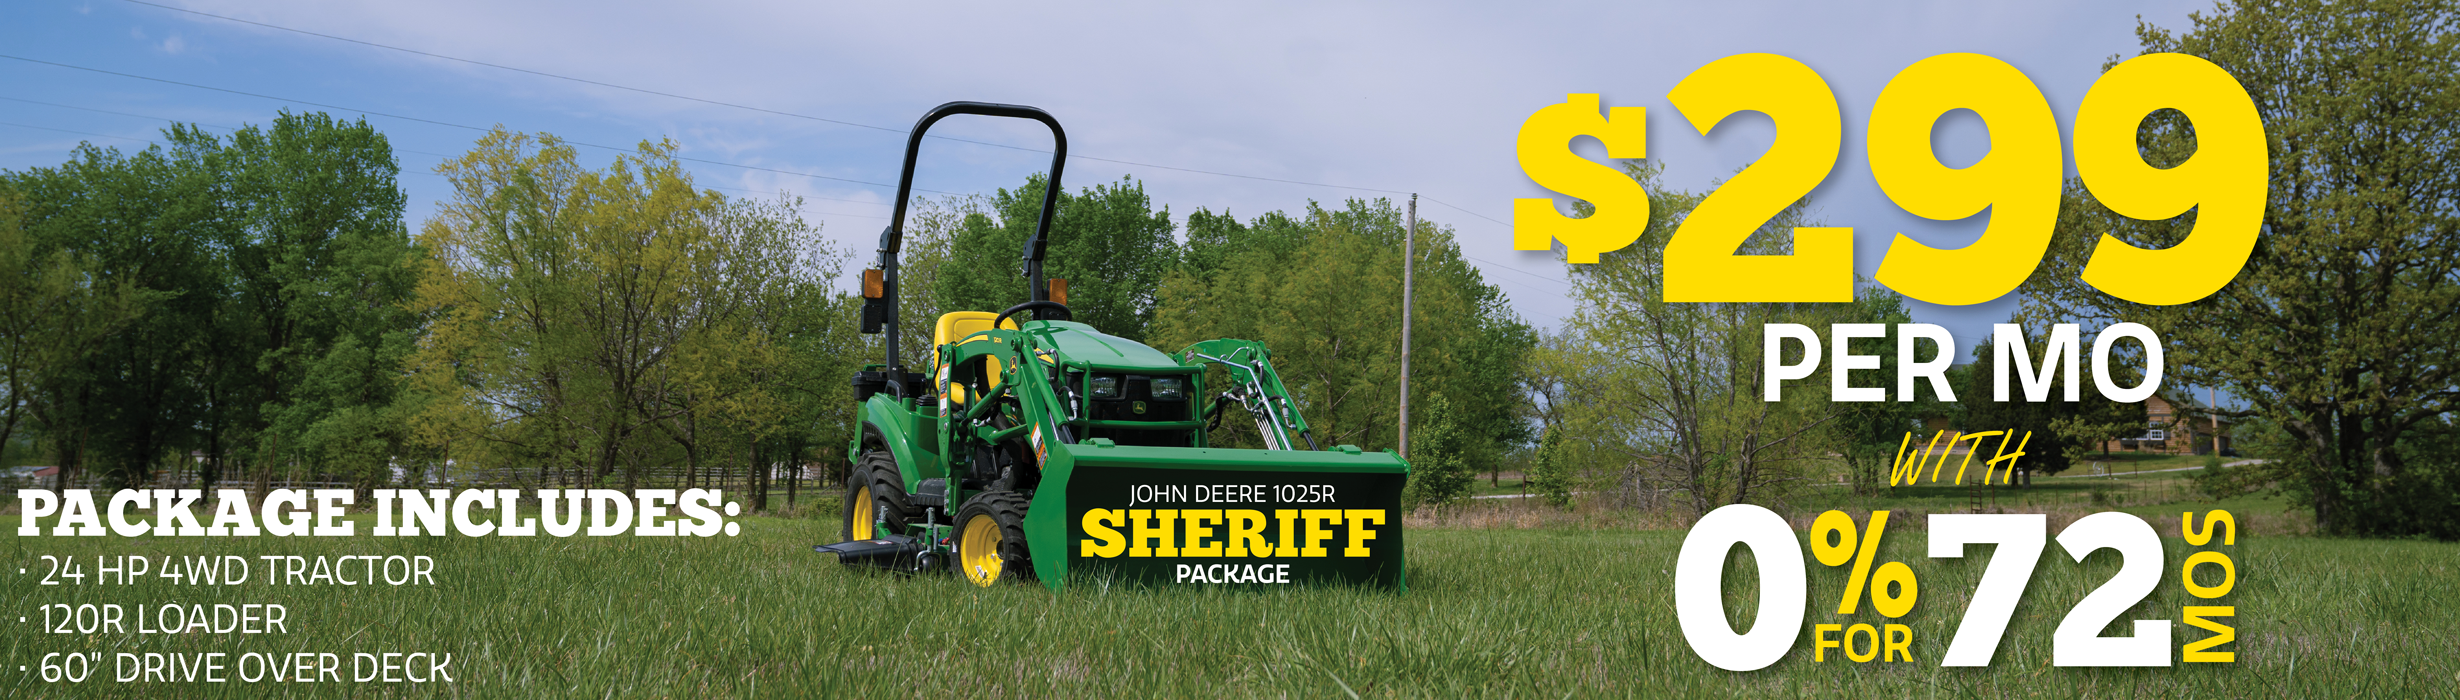 Get the 1025R Sheriff PKG for $299/mo WITH 0% for 72 months!